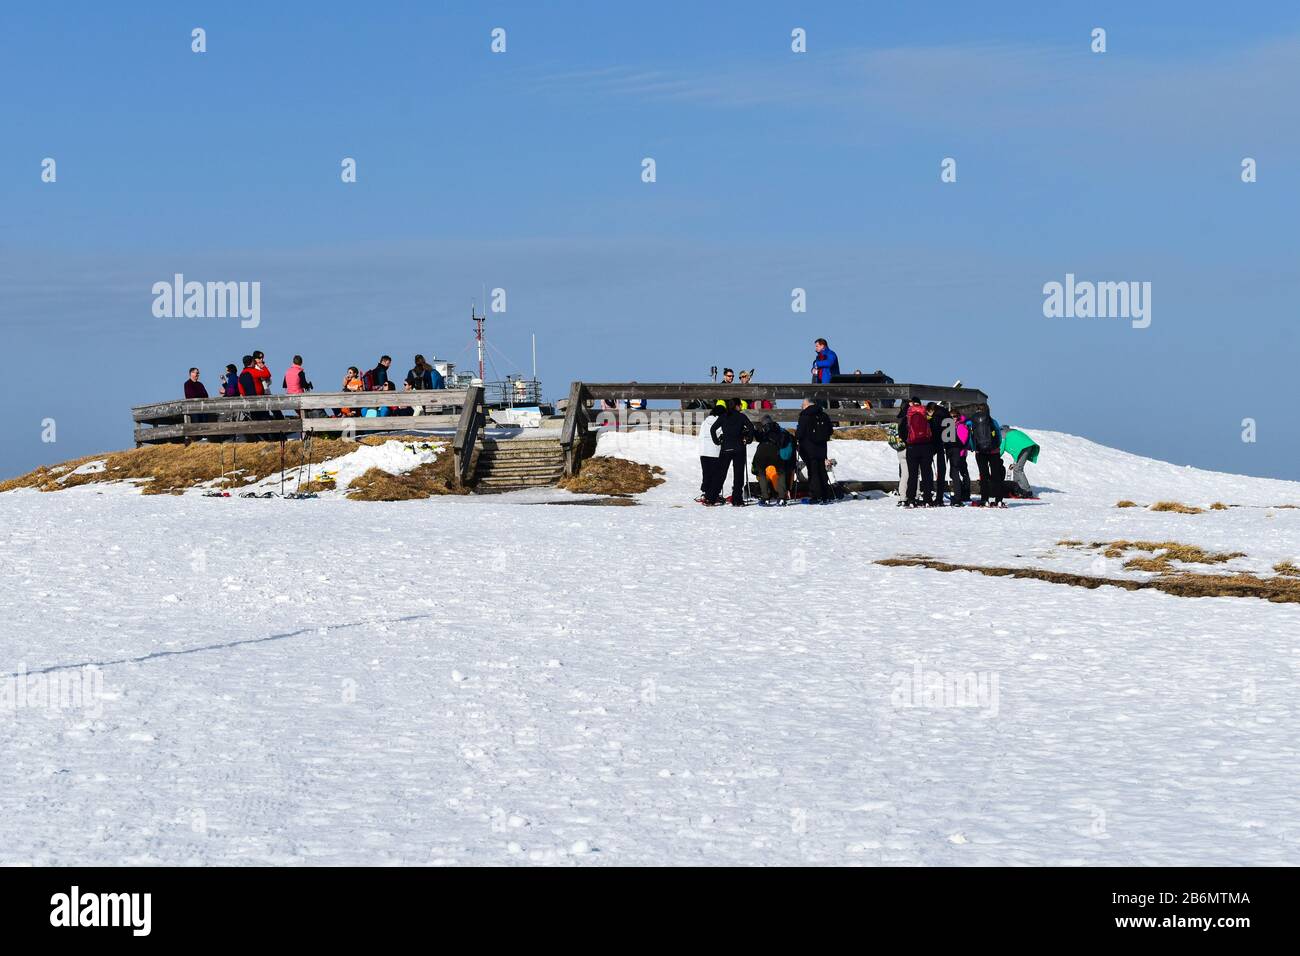 Feldberg, Germany - January 25, 2020: Group of hikers at 1,493 metres (4,898 ft) the Feldberg in the Black Forest. Stock Photo